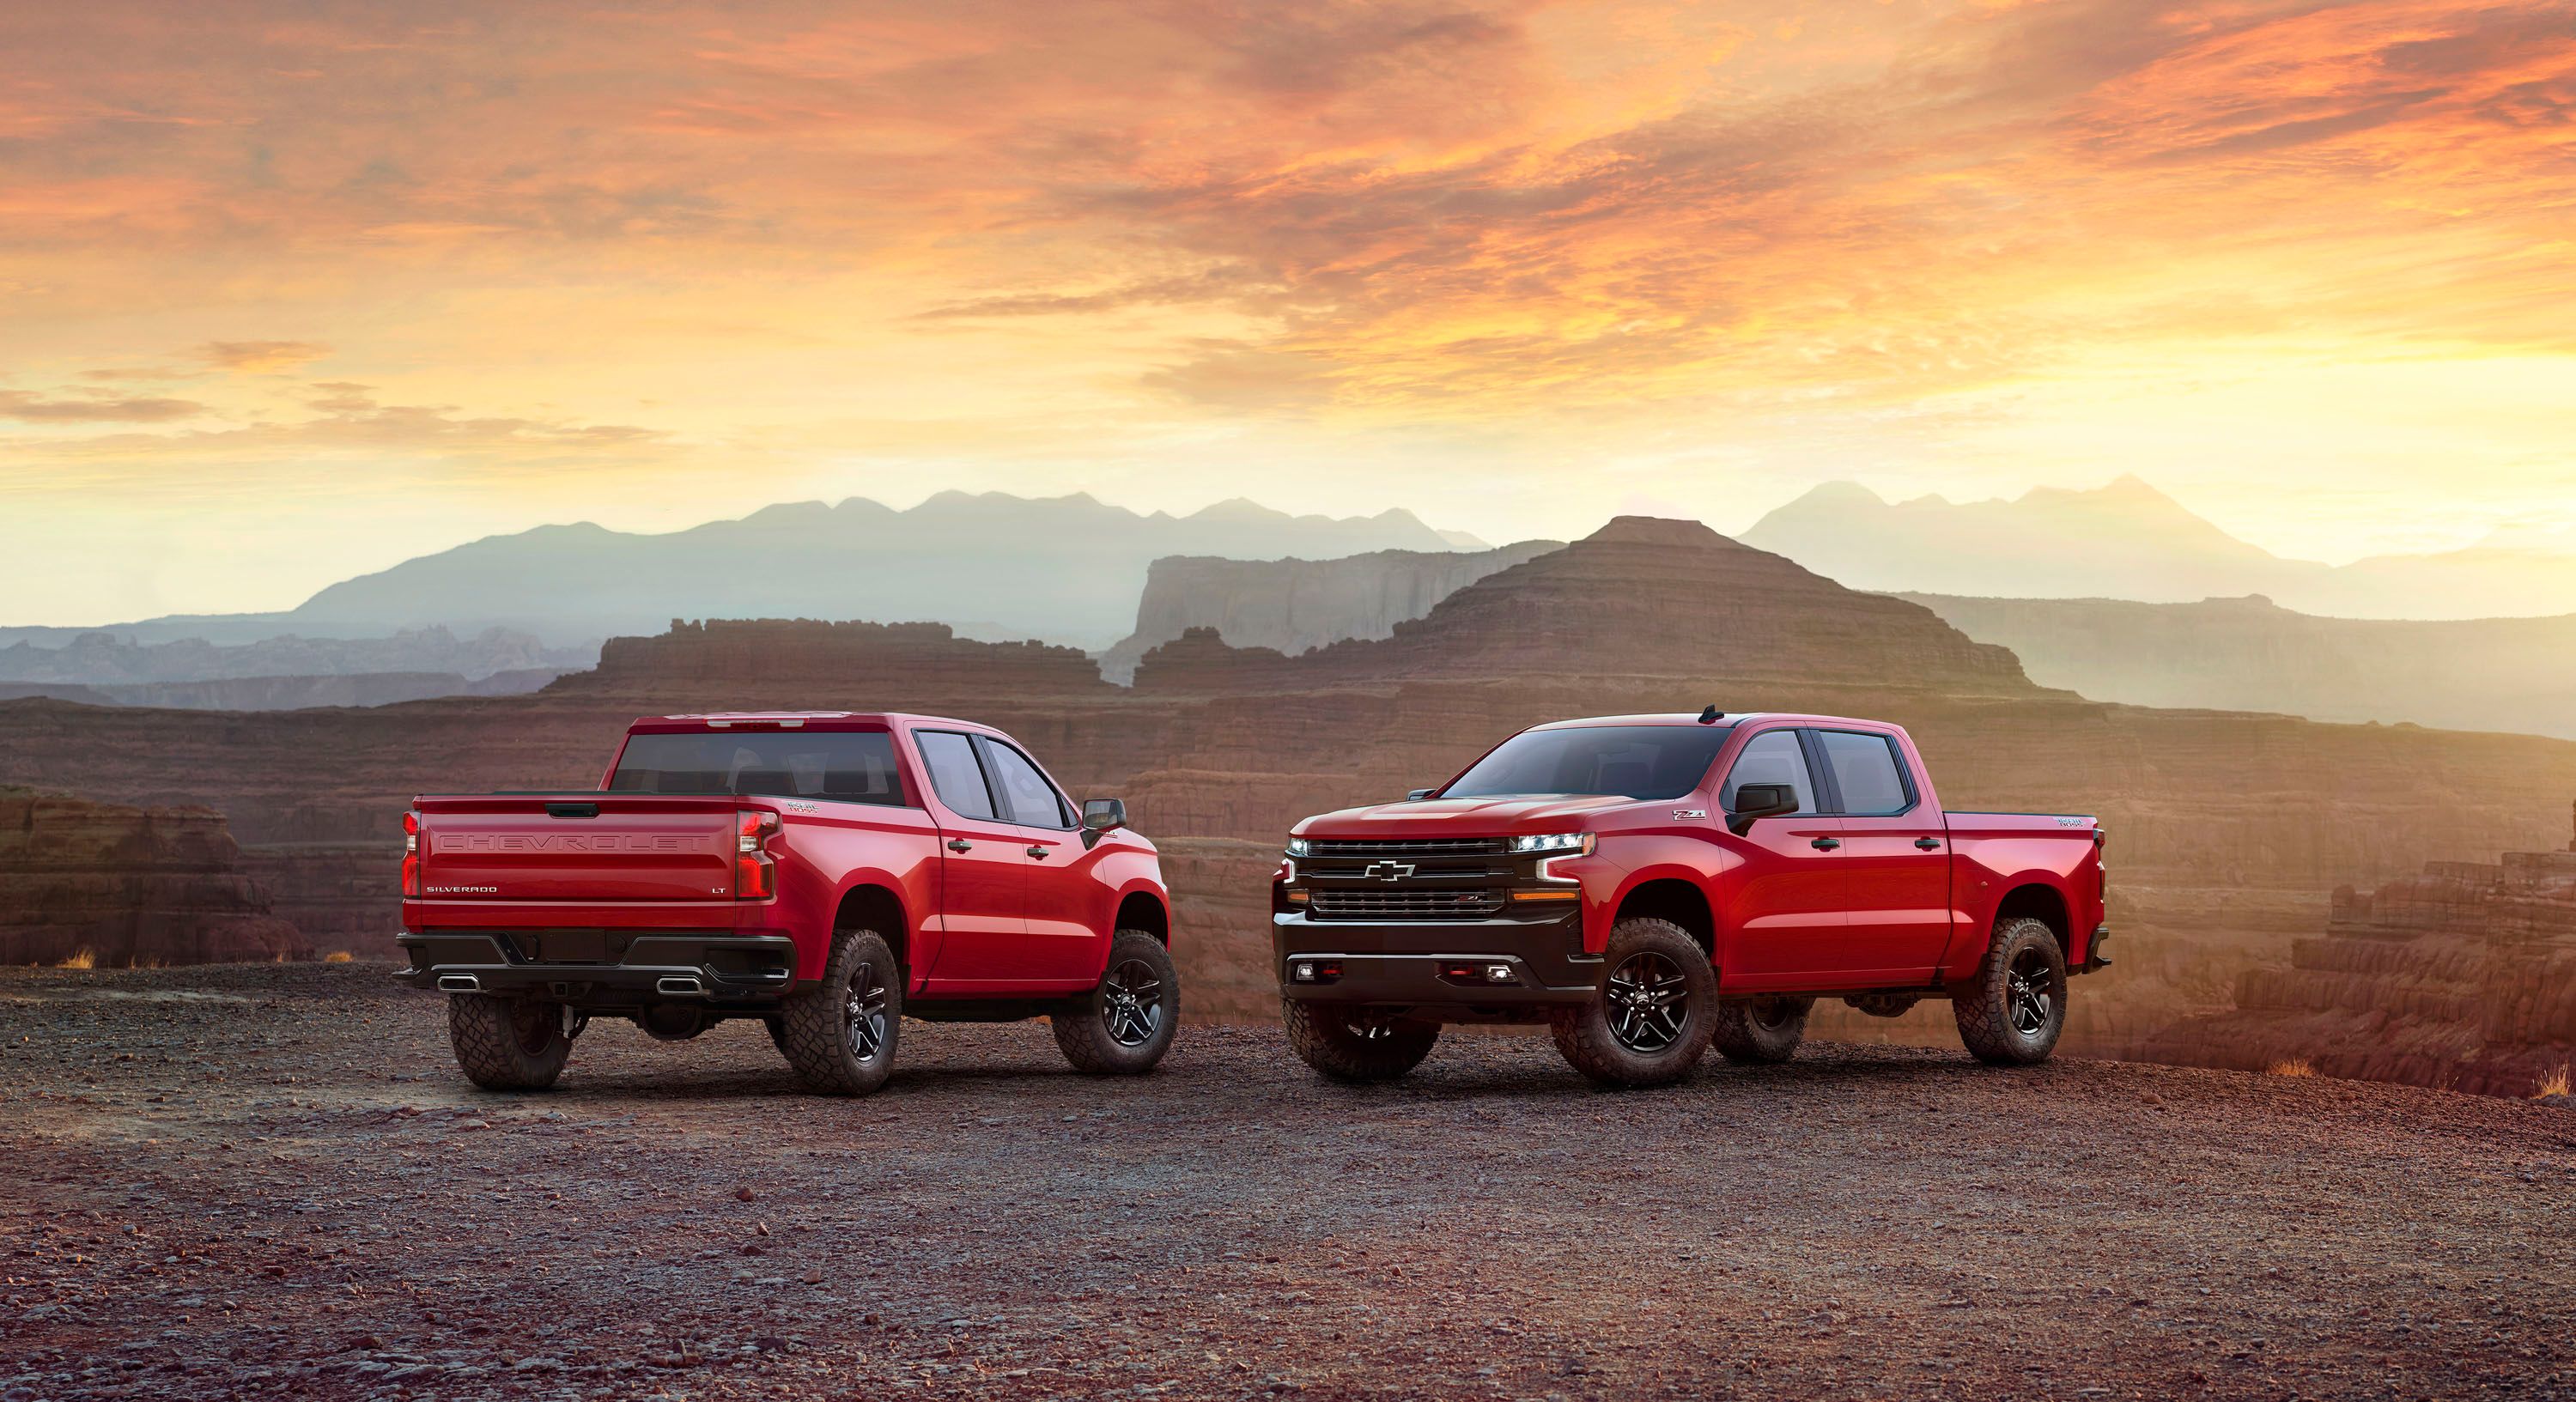 2018 Wallpaper Selections of the Day: 2019 Chevy Silverado